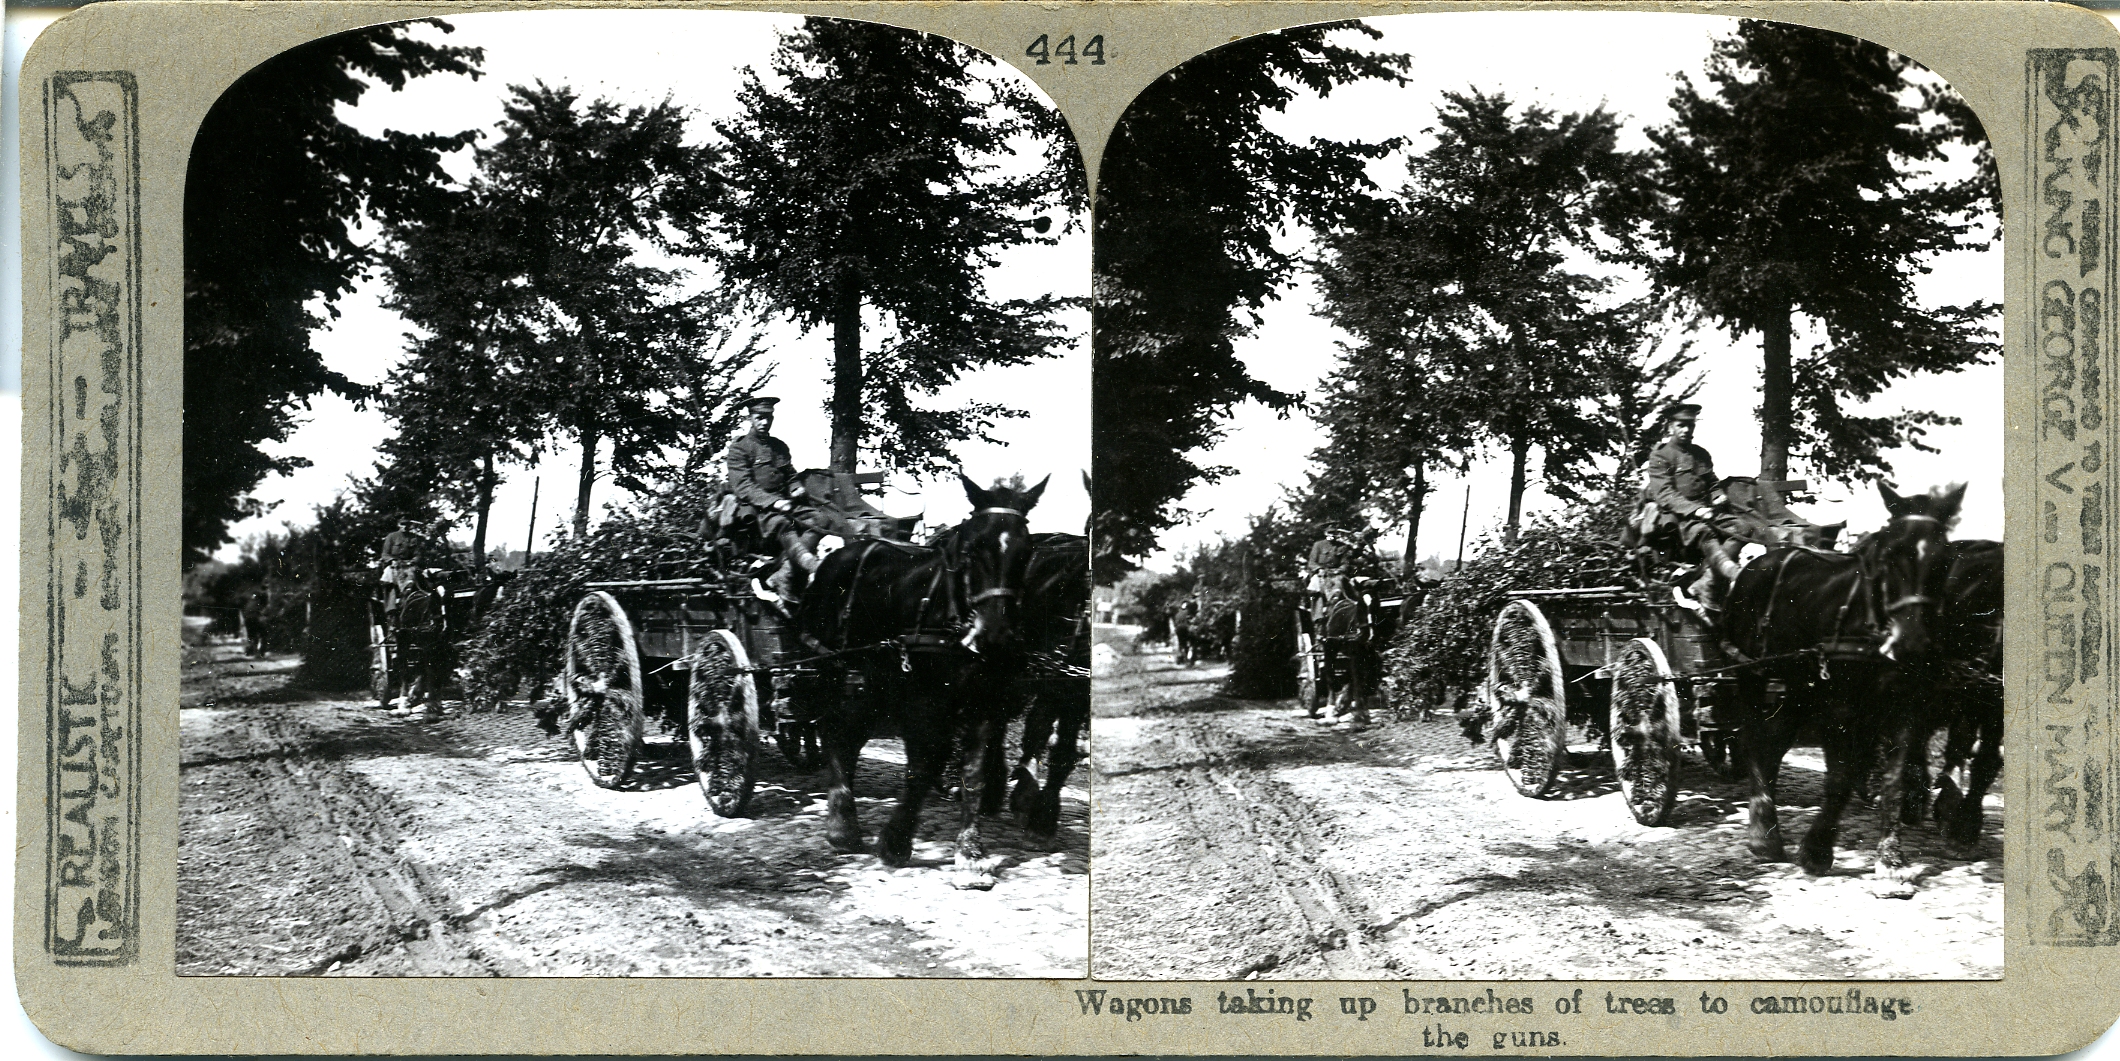 Wagons taking up branches of trees to camouflage the guns